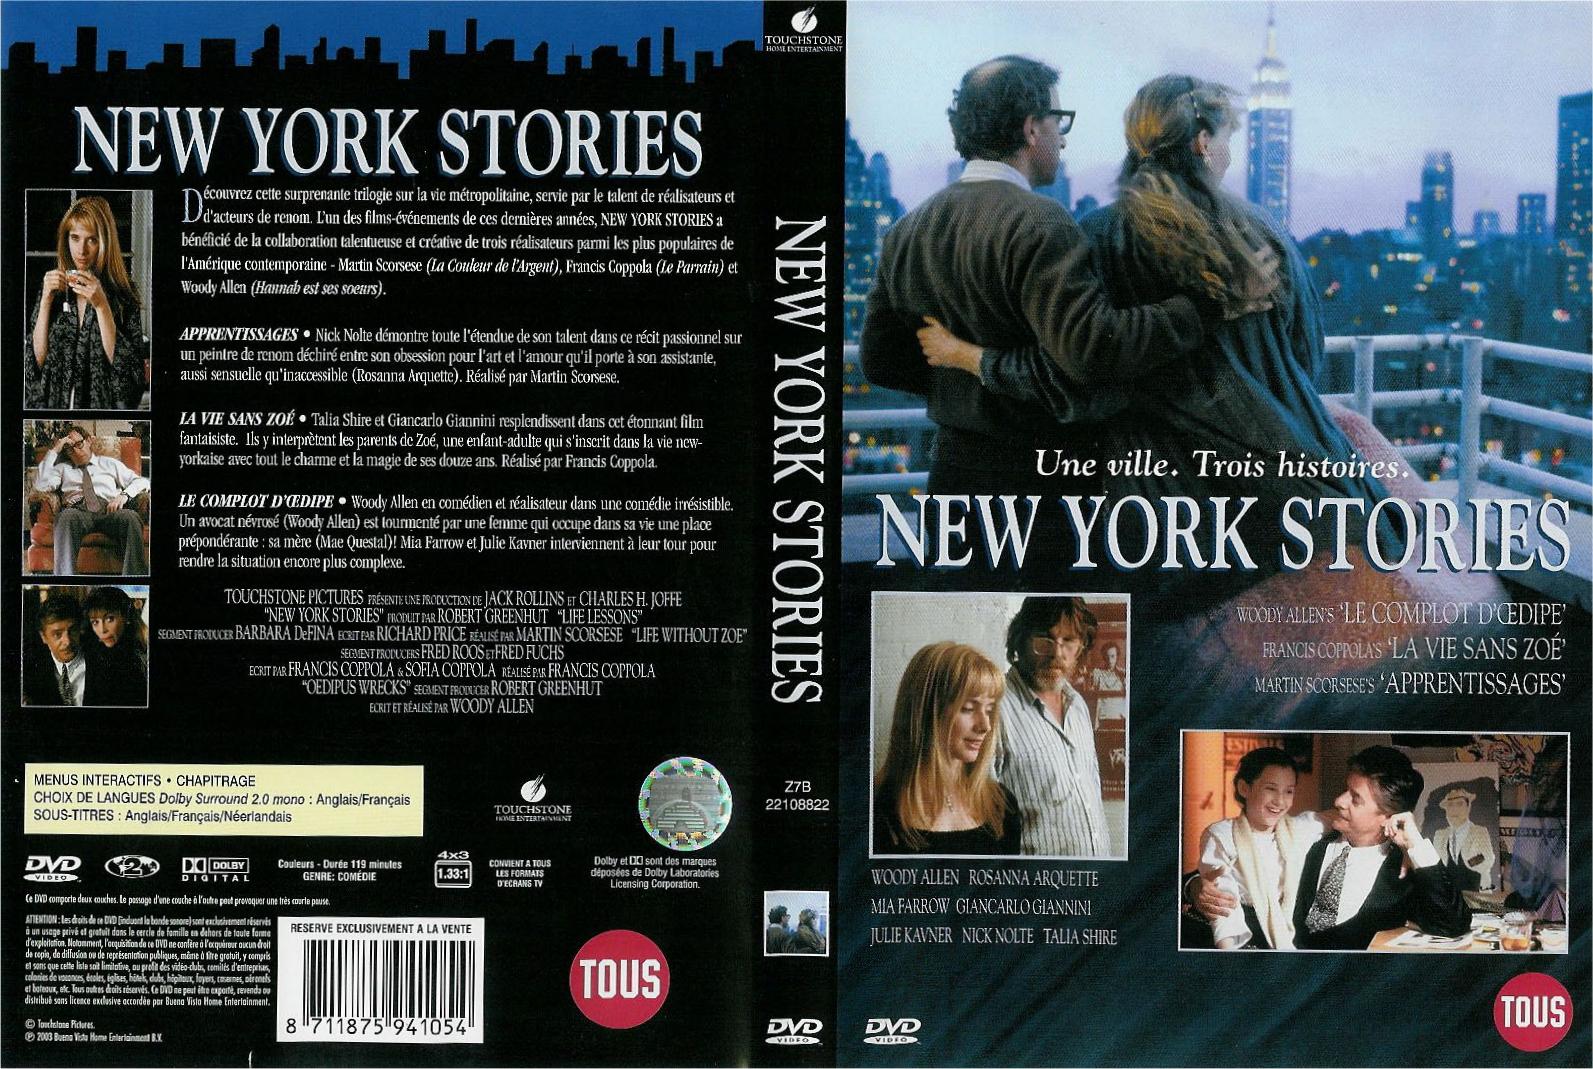 Jaquette DVD New York stories